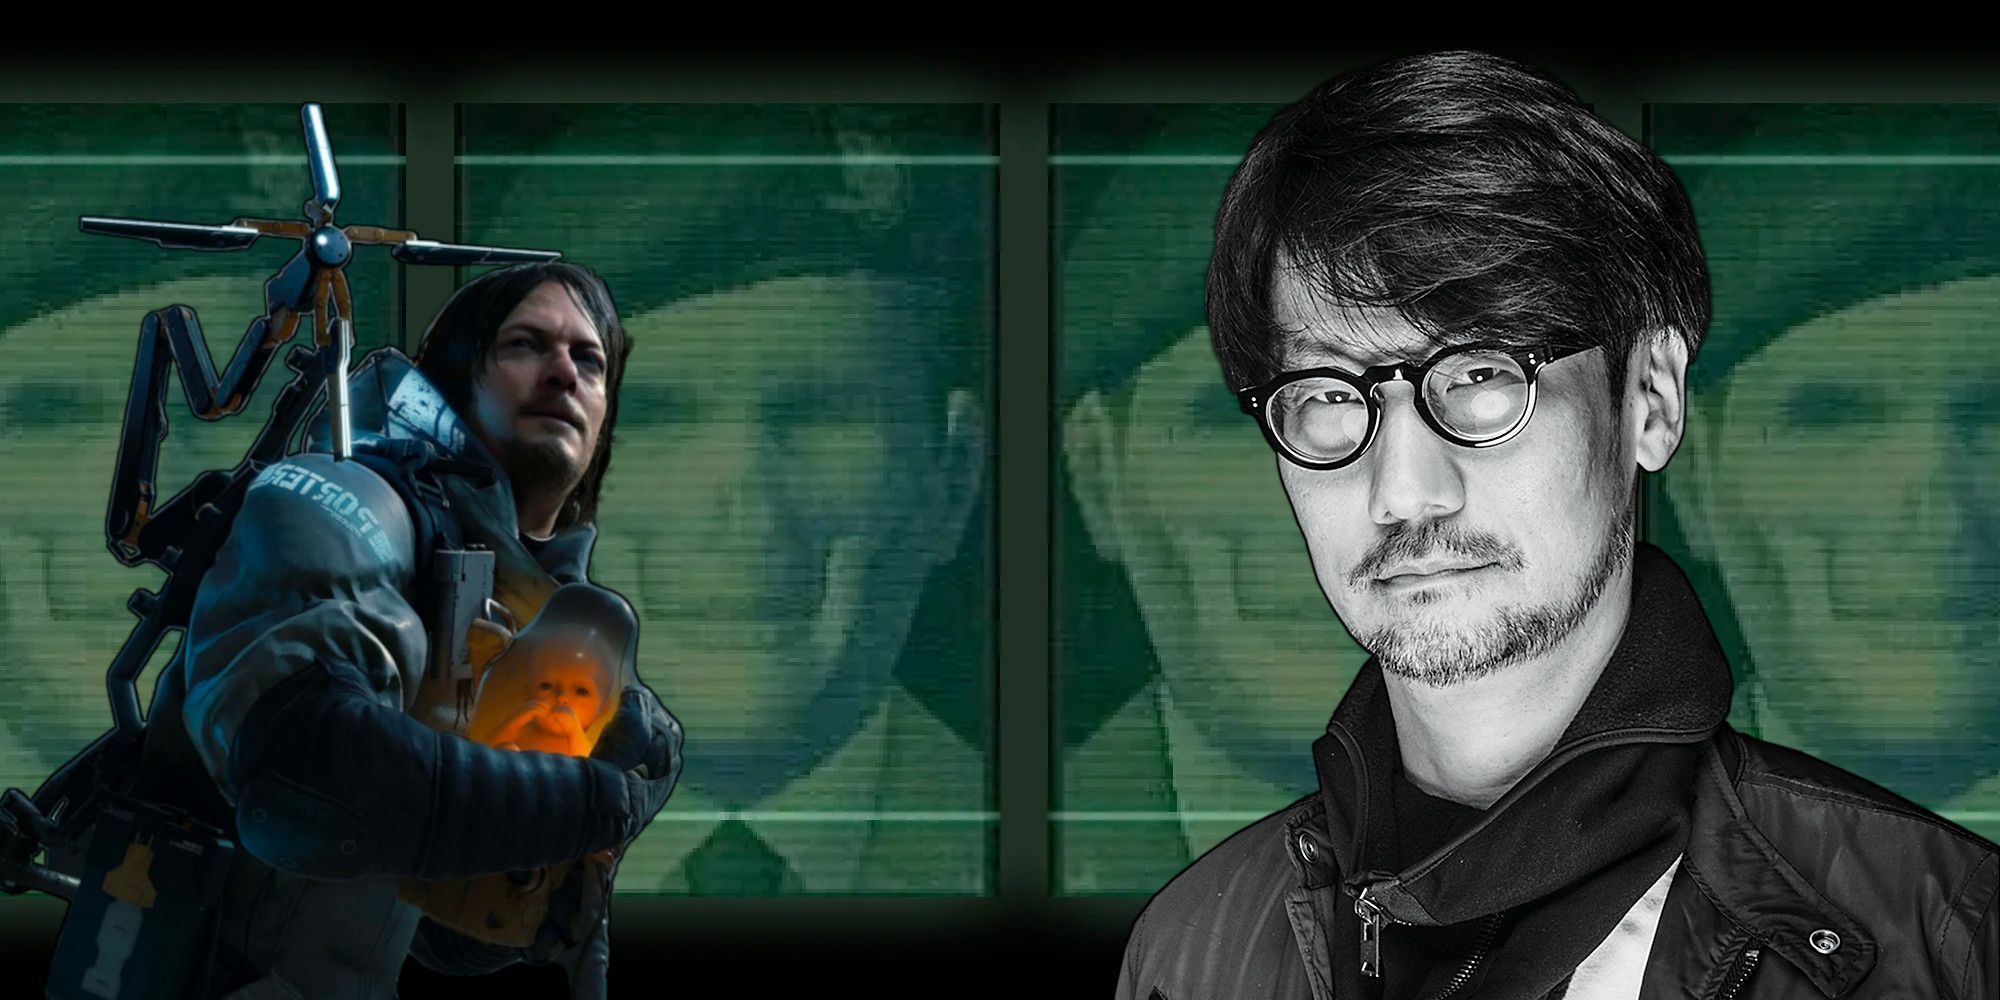 Hideo Kojima Predictions: an Image of Hideo Kojima alongside Sam Porter Bridges from Death Stranding and the Rogue AI from Metal Gear Solid 2 in the background